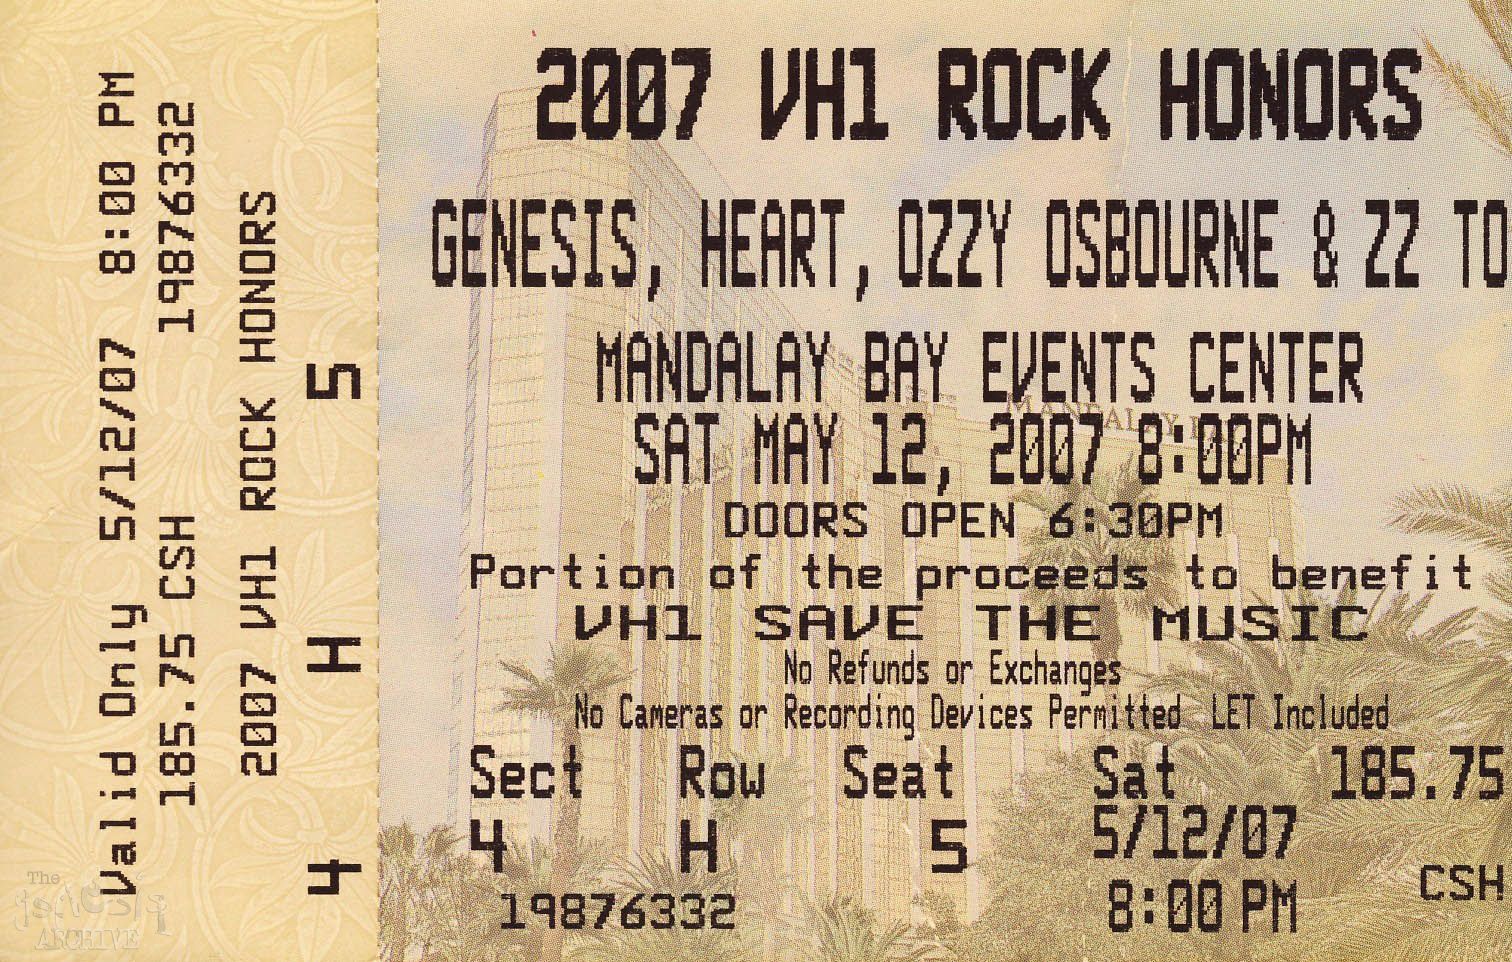 A ticket for the show The VH1 Rock Honours held at the Mandalay Bay Centre ...